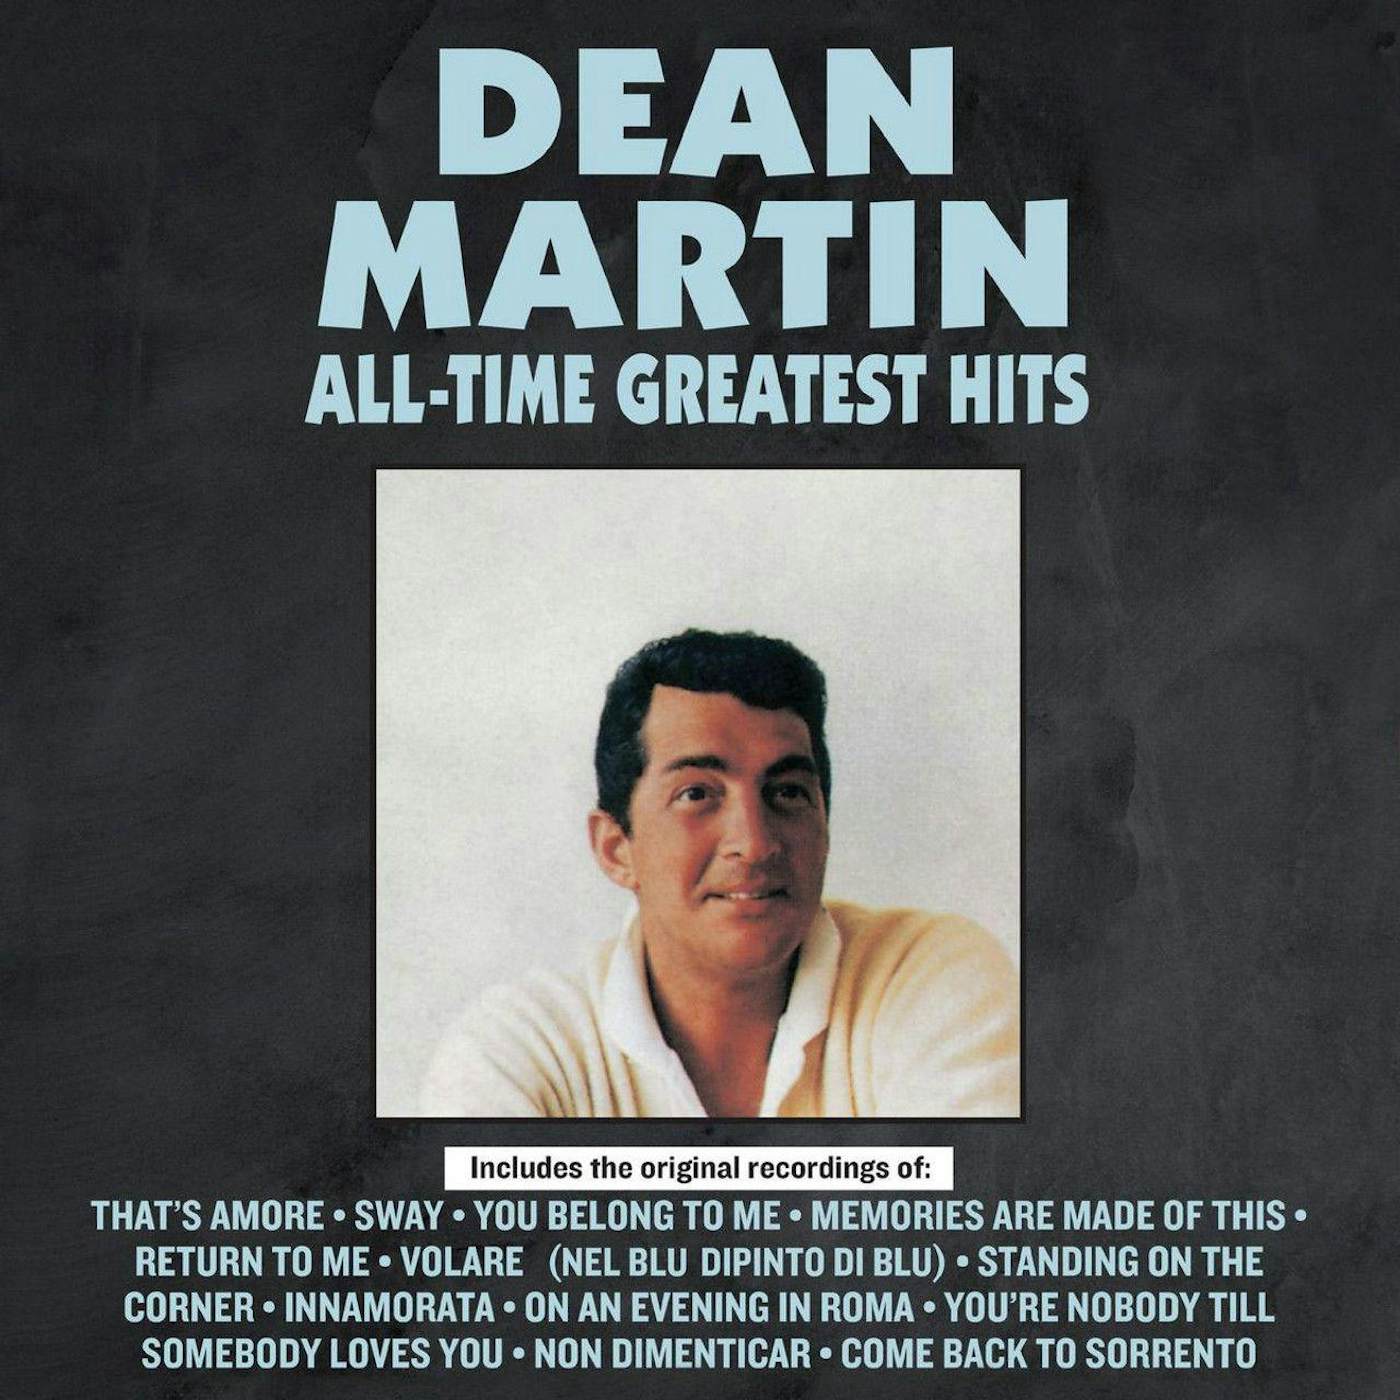 Dean Martin All-Time Greatest Hits Vinyl Record